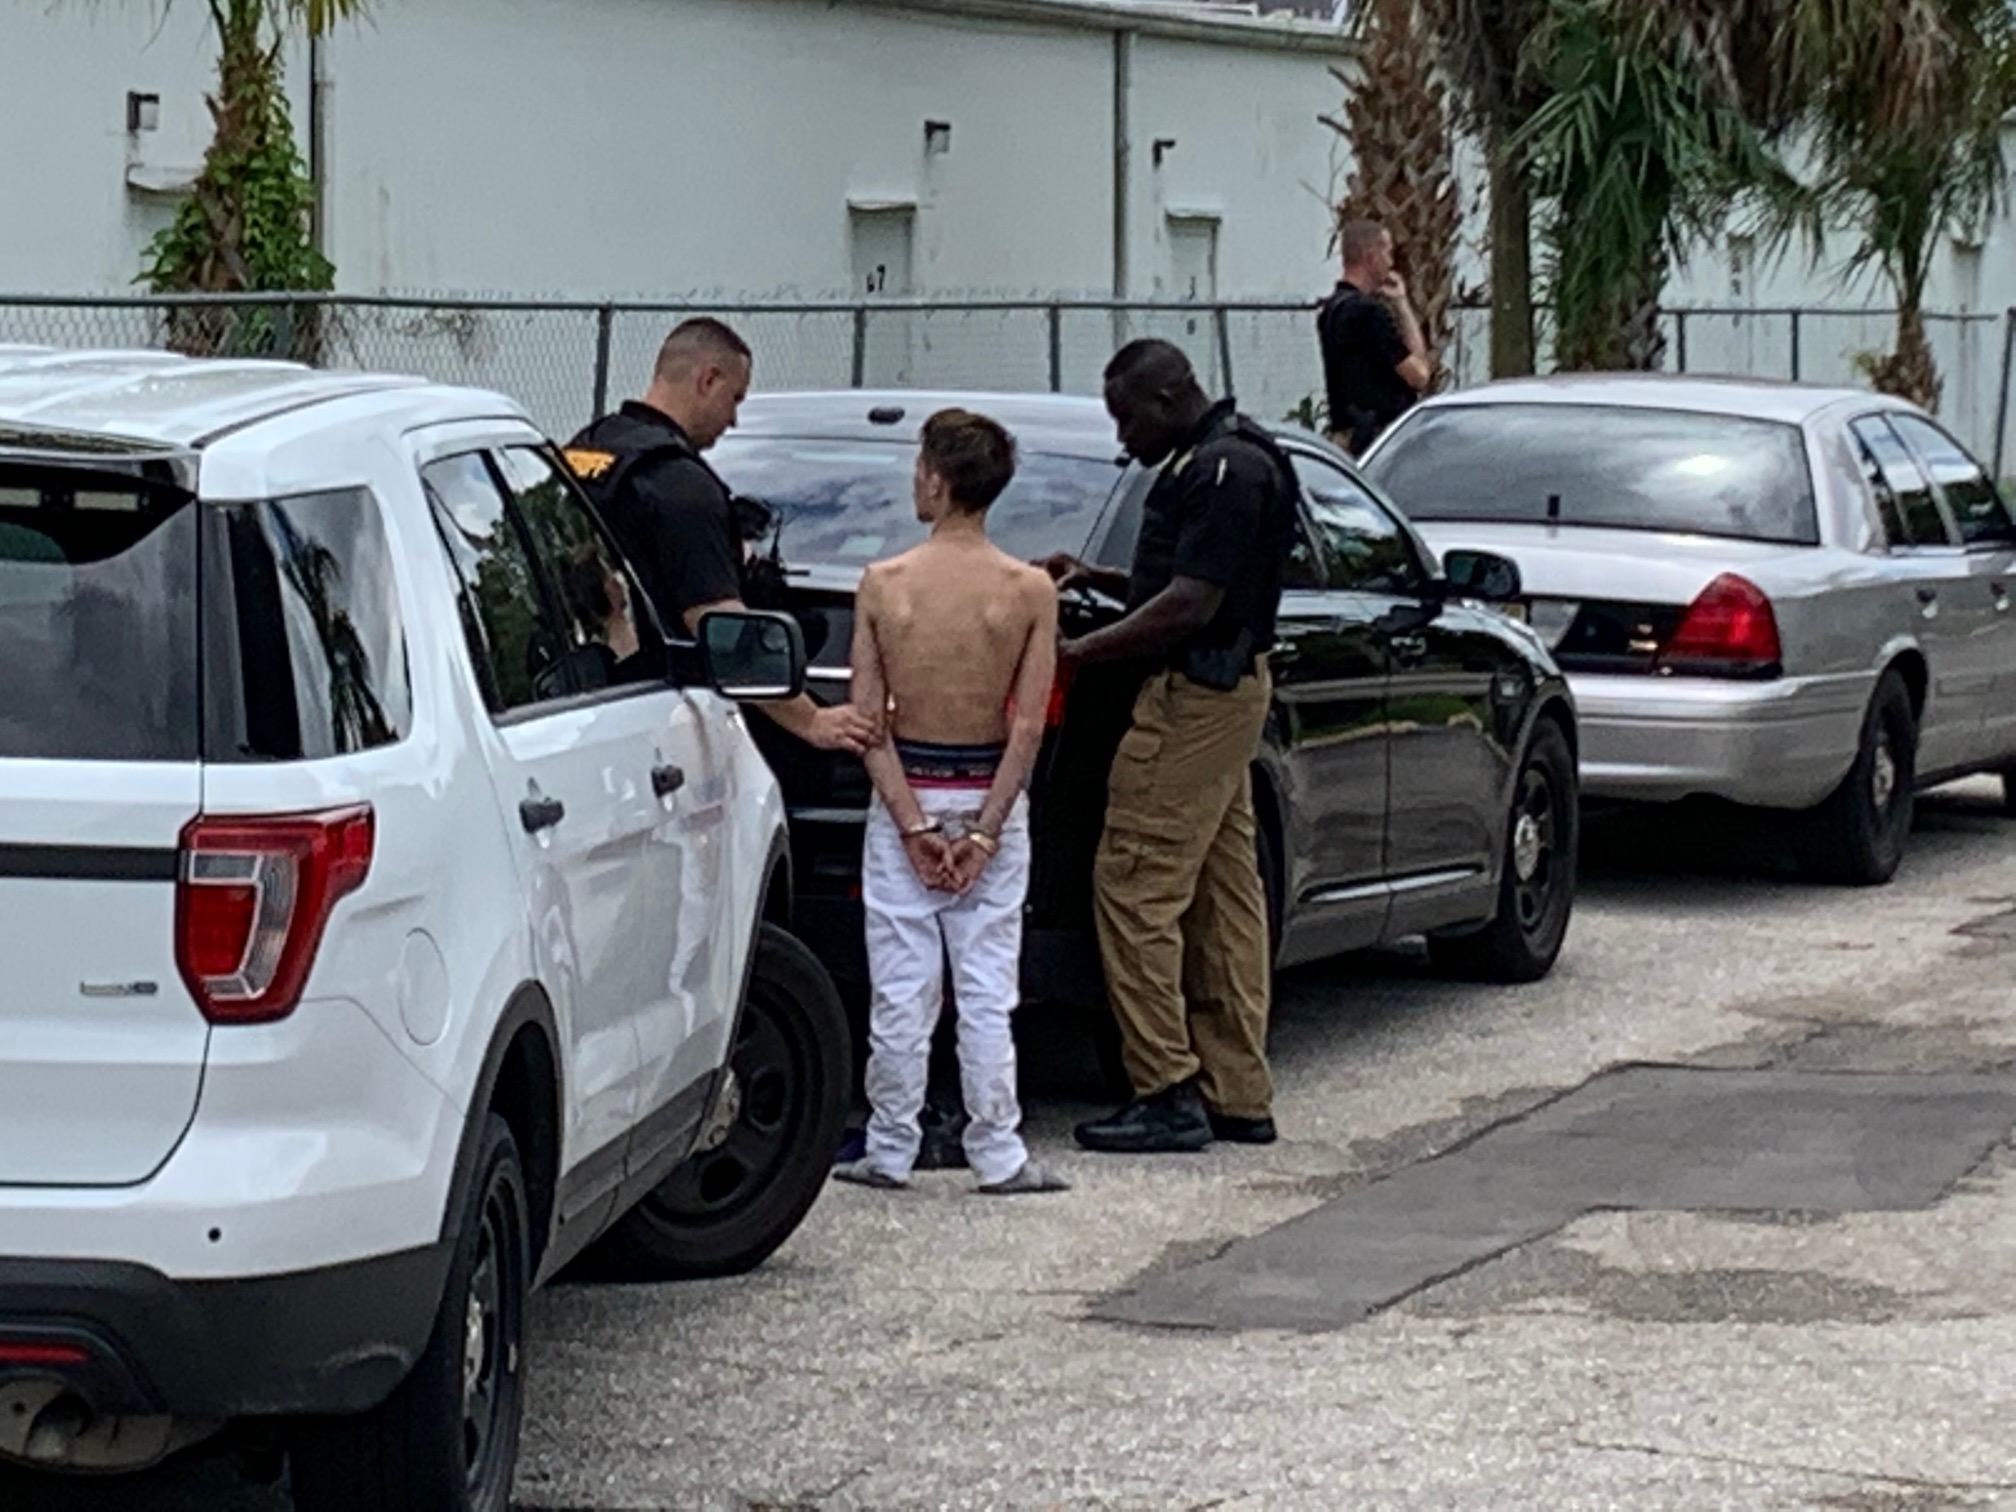 Cape Coral police confirm three armed robberies connected two detained